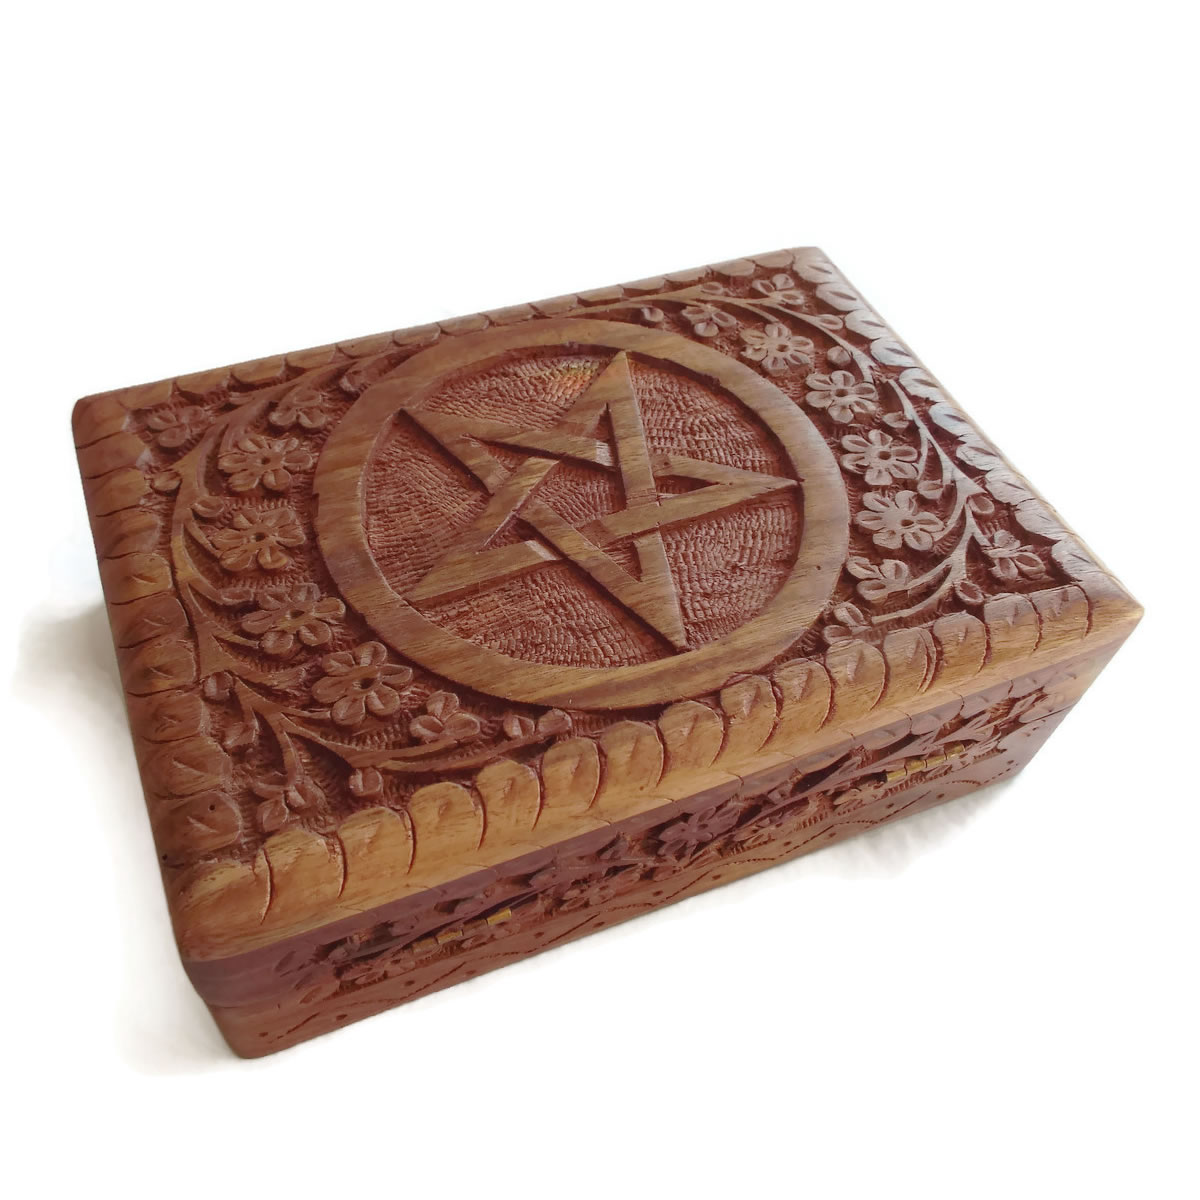 Carved Wooden Tarot or Oracle Box with Pentacle